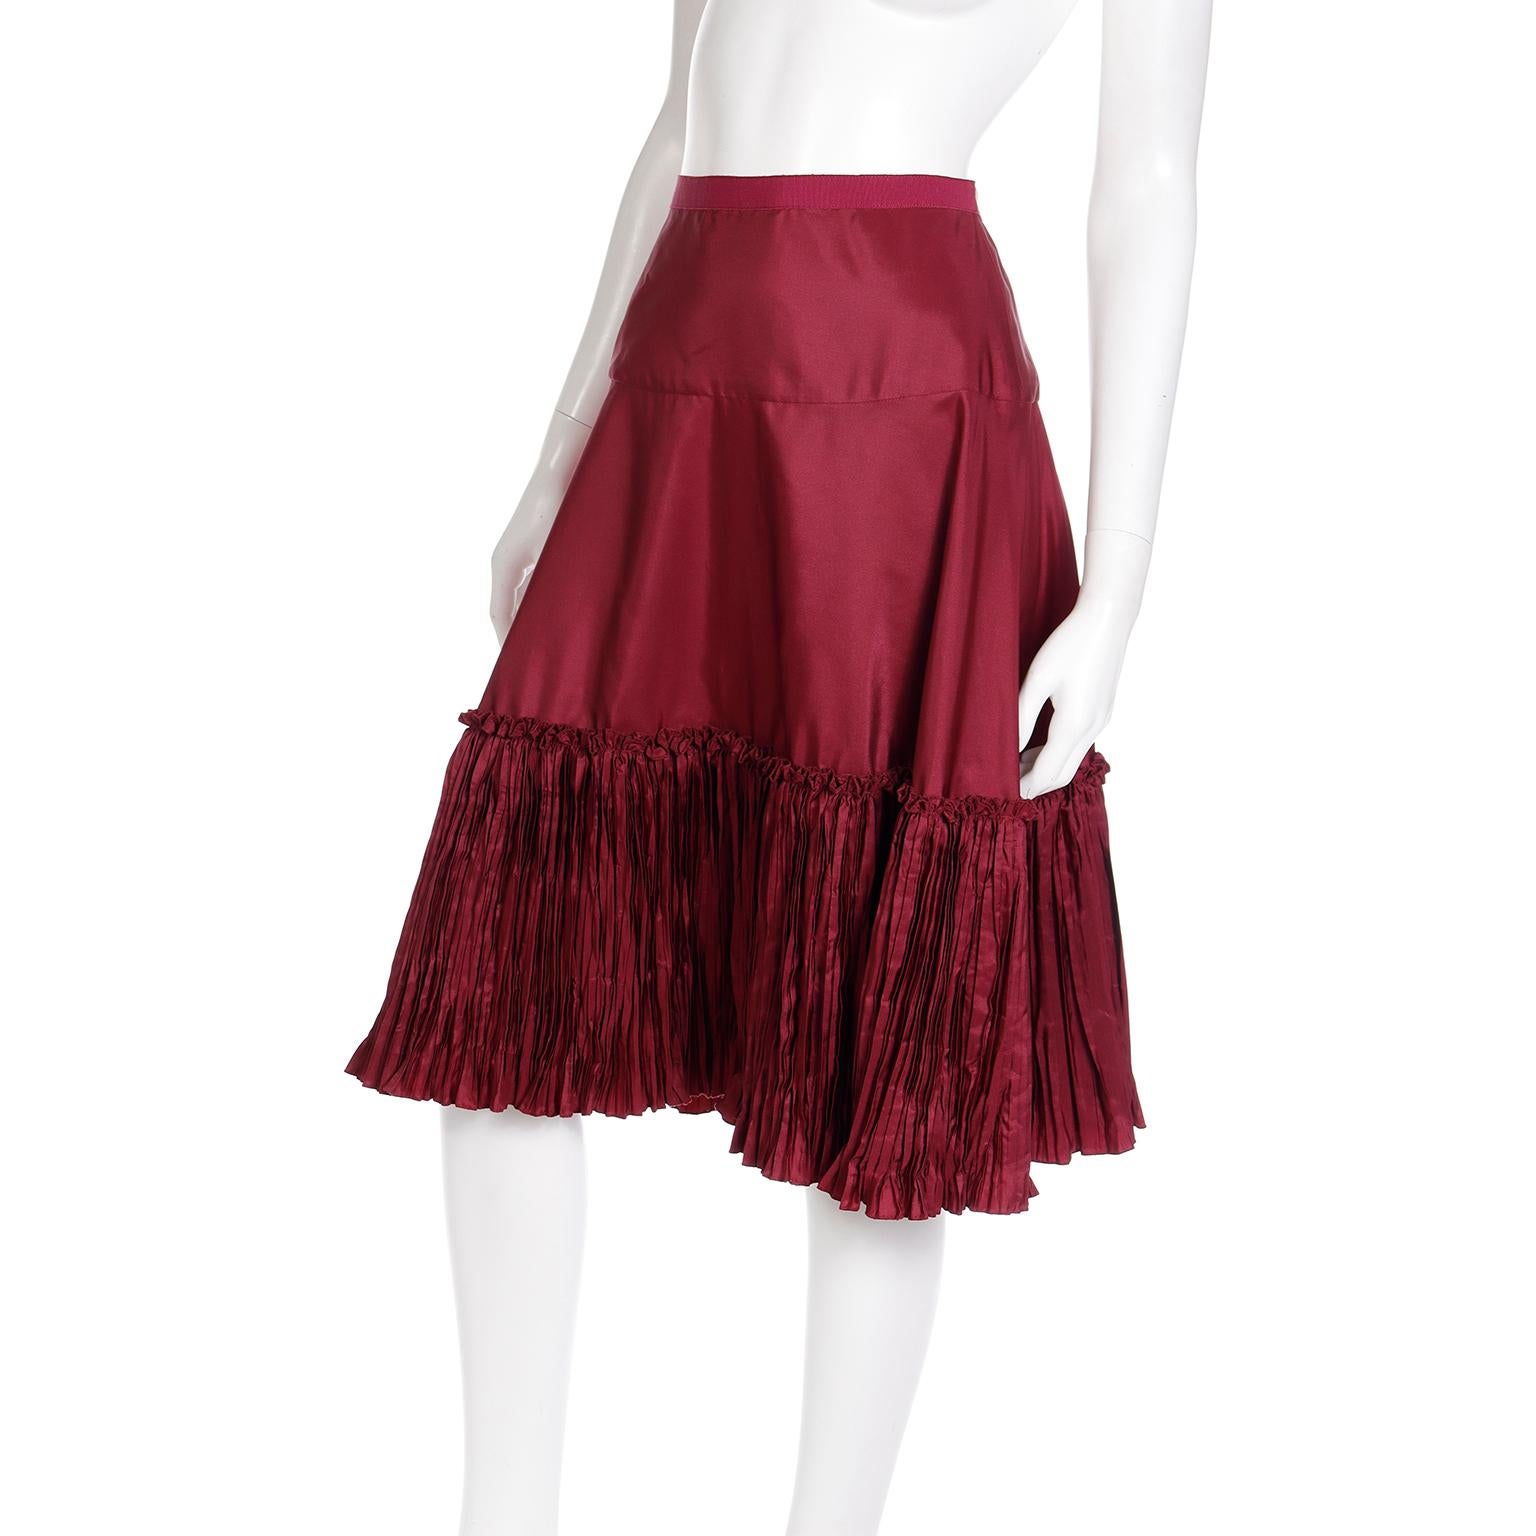 Vintage Oscar de la Renta Burgundy Evening Skirt W Pleated Ruffle In Excellent Condition For Sale In Portland, OR